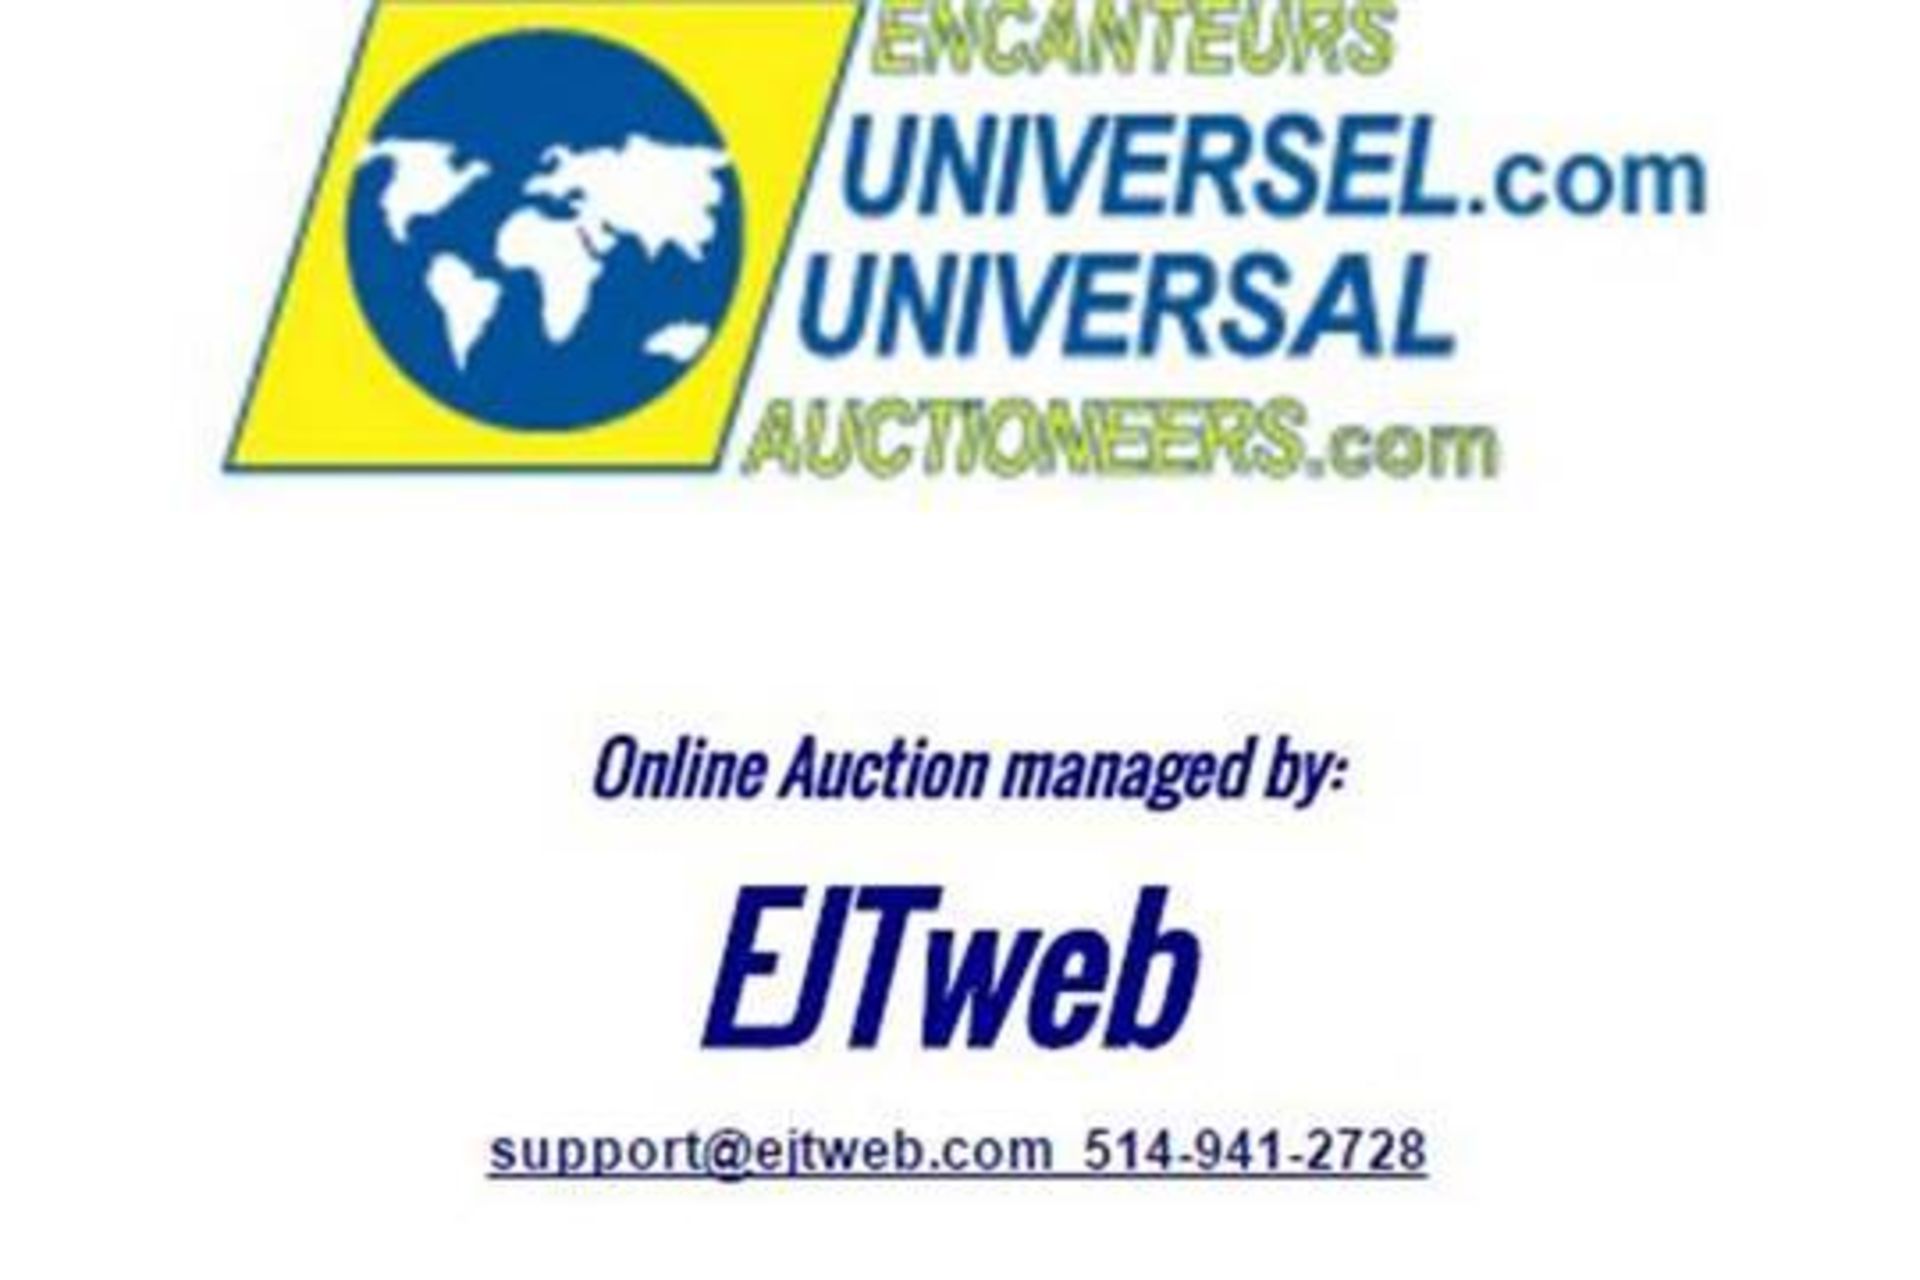 Online auction management provided by EJTweb.com on behalf of Universal Auctioneers